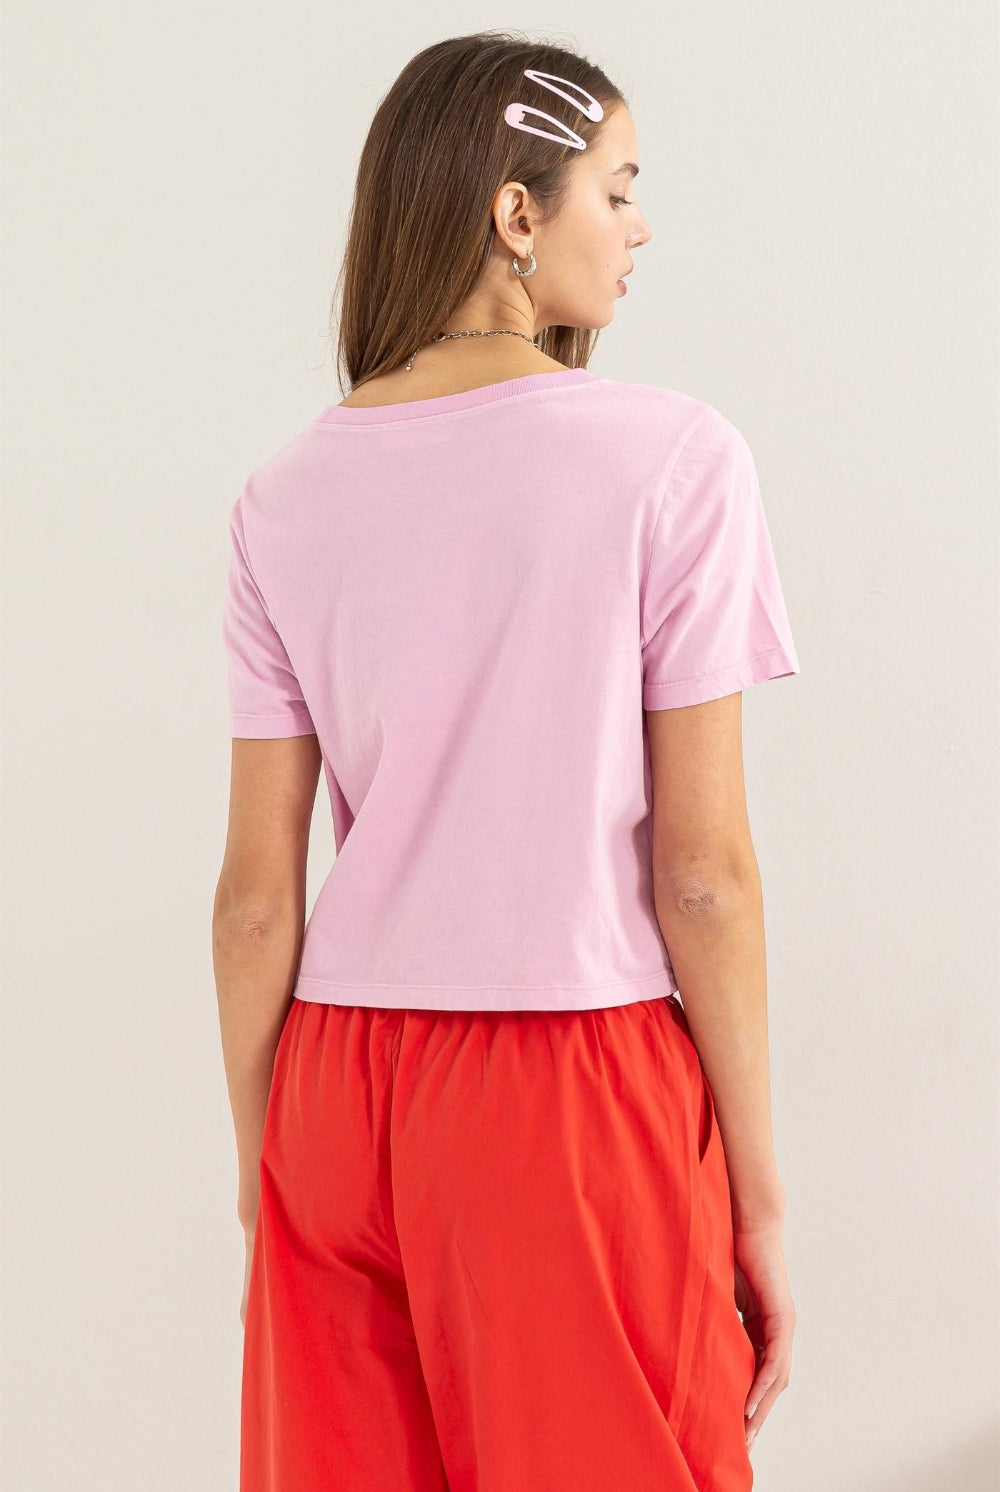 A model showcases a pastel pink HYFVE Round Neck Cropped T-Shirt, paired with vibrant red trousers. The tee has a relaxed fit, short sleeves, and a classic round neckline, exemplifying casual comfort with a touch of modern style. This image is presented to feature the product available for purchase at GemThreads Boutique, highlighting the garment's color and design for potential customers.